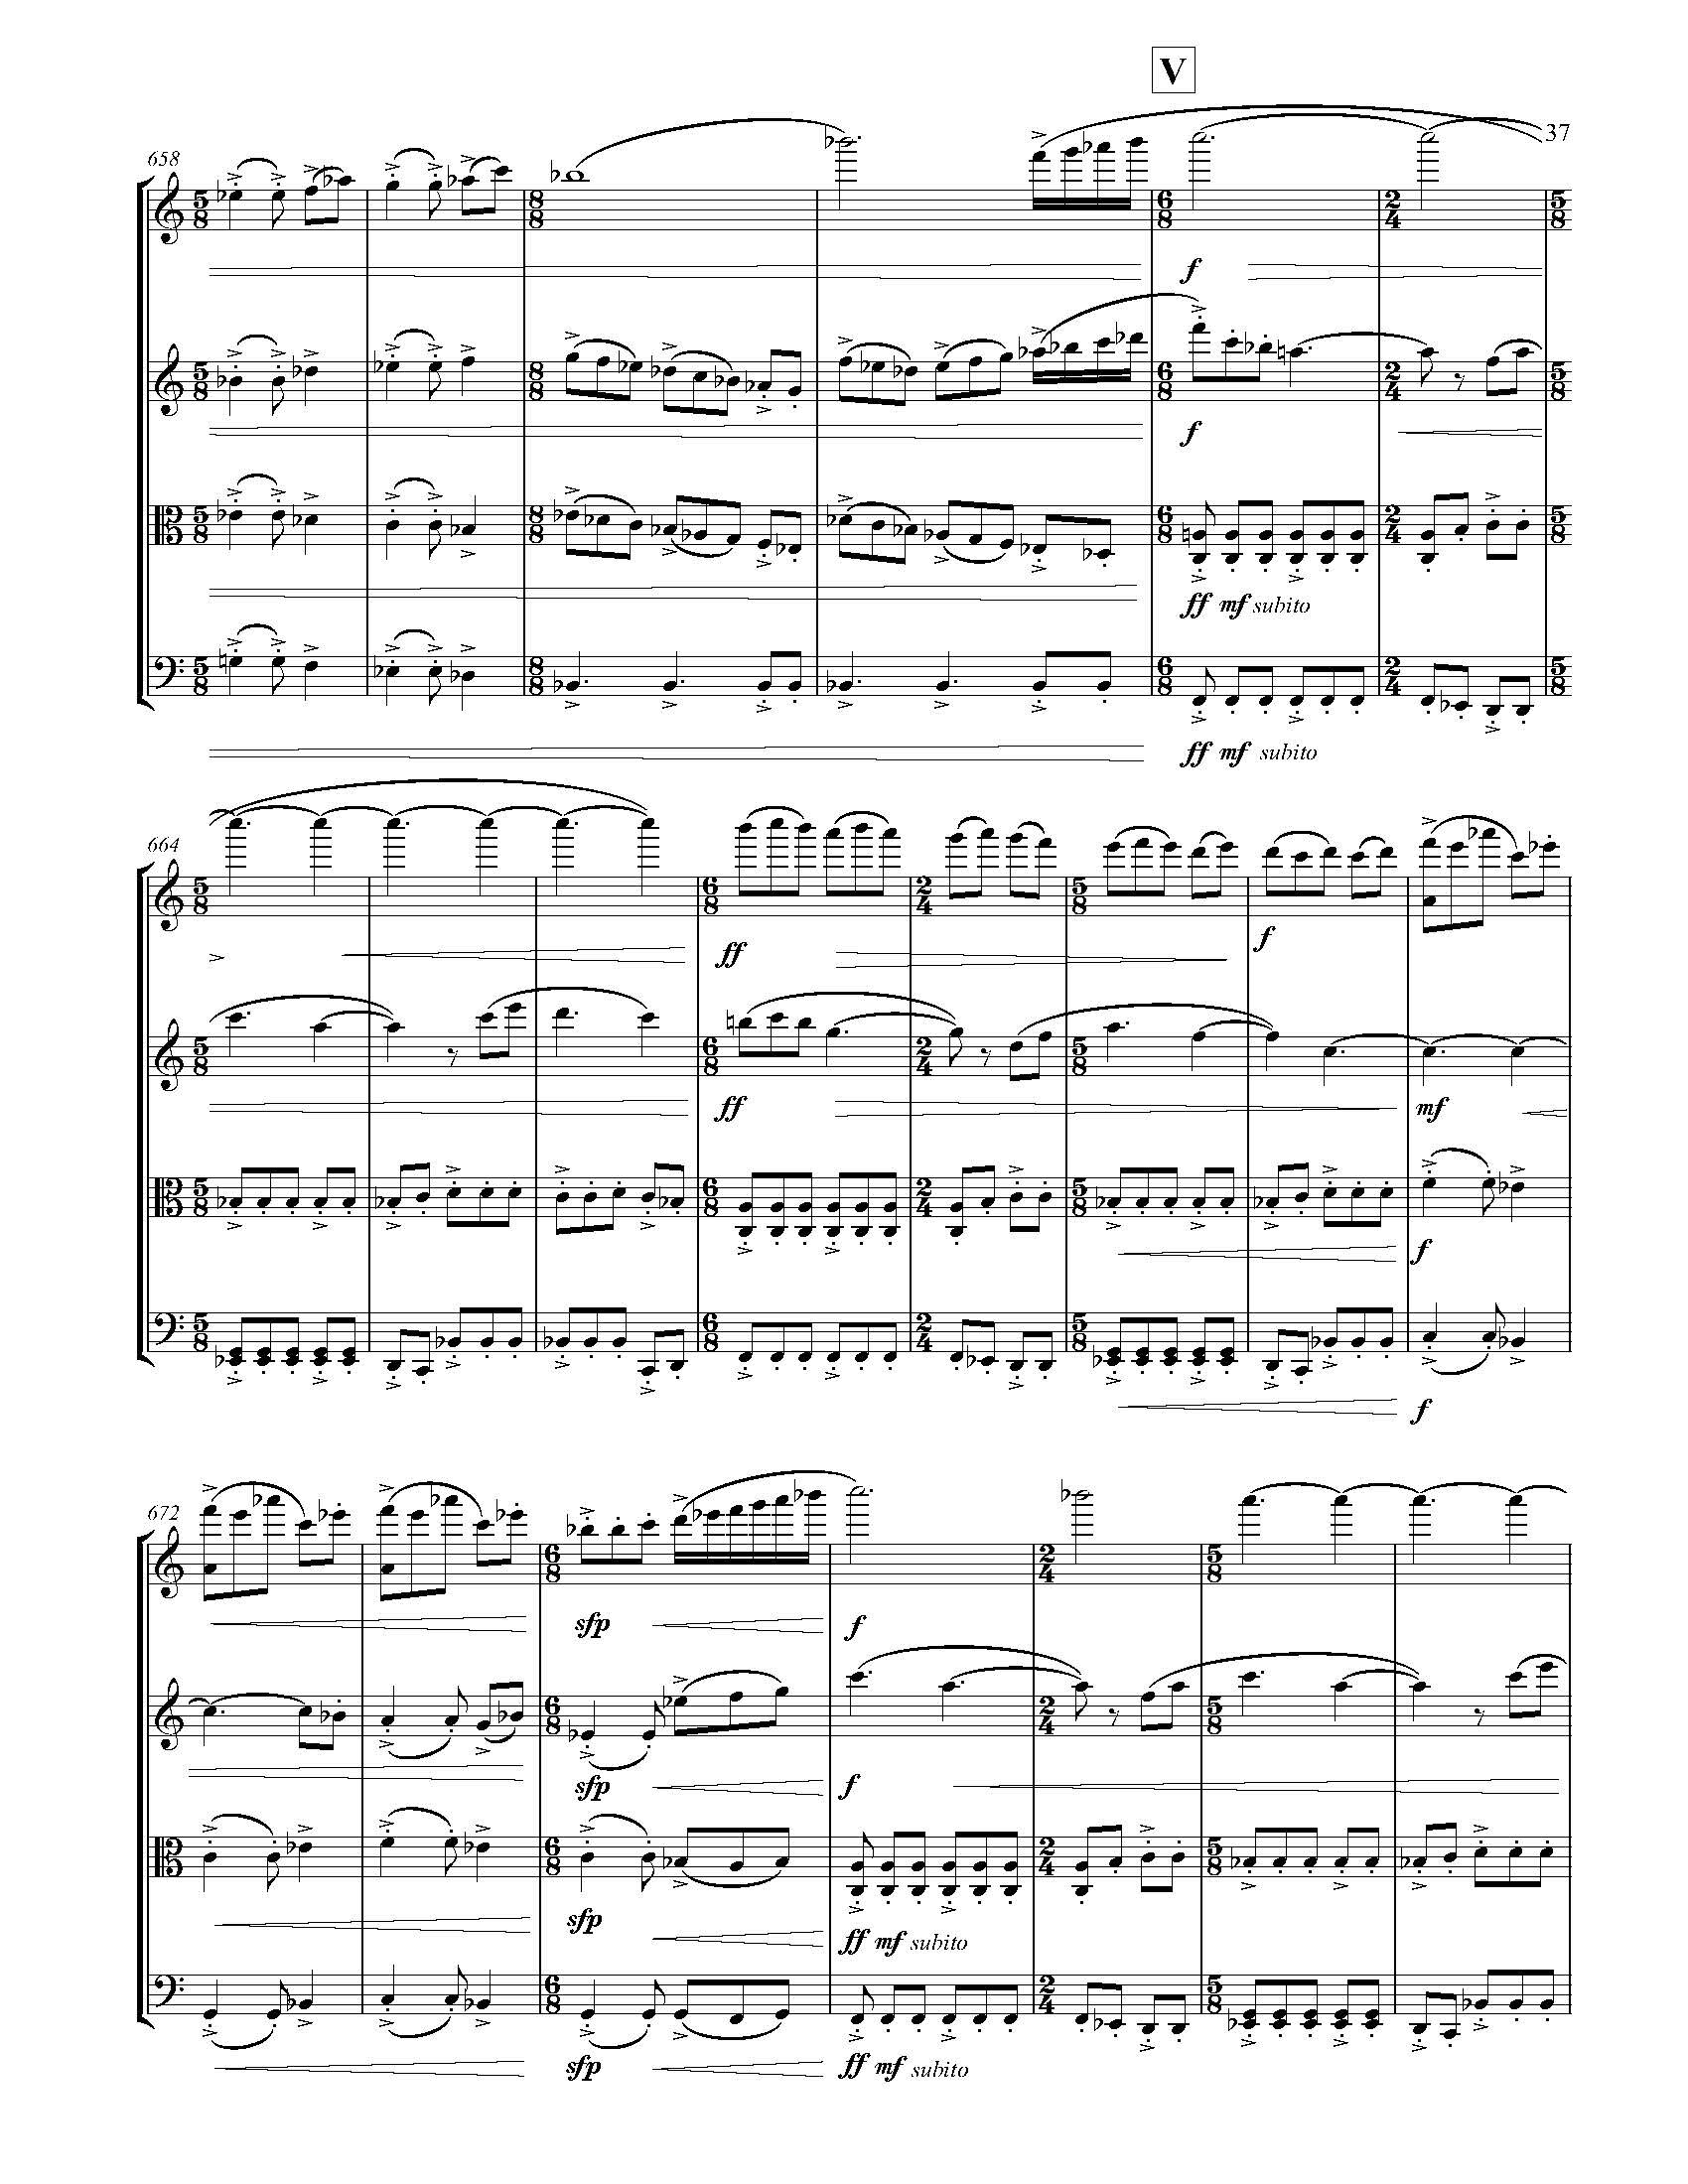 A Country of Vast Designs - Complete Score_Page_43.jpg